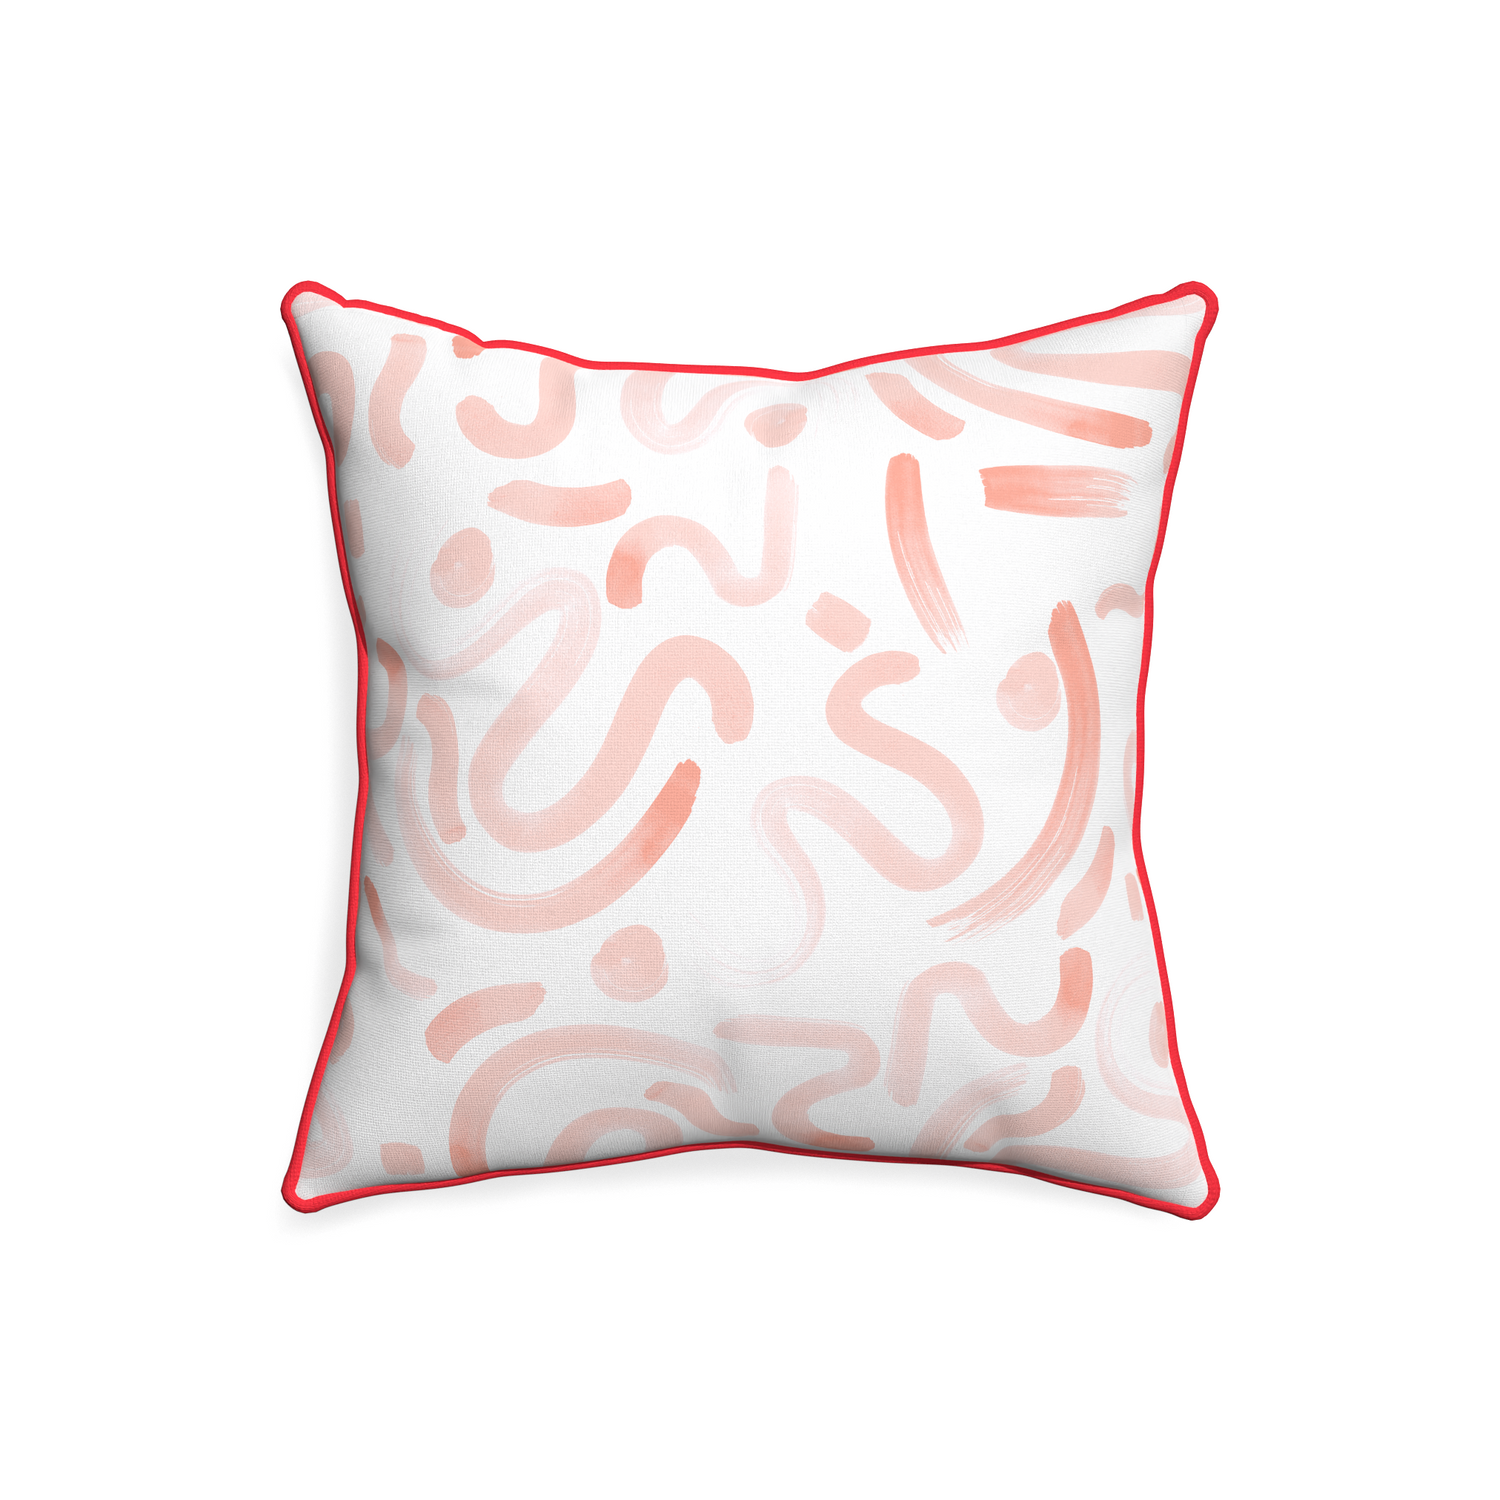 20-square hockney pink custom pillow with cherry piping on white background